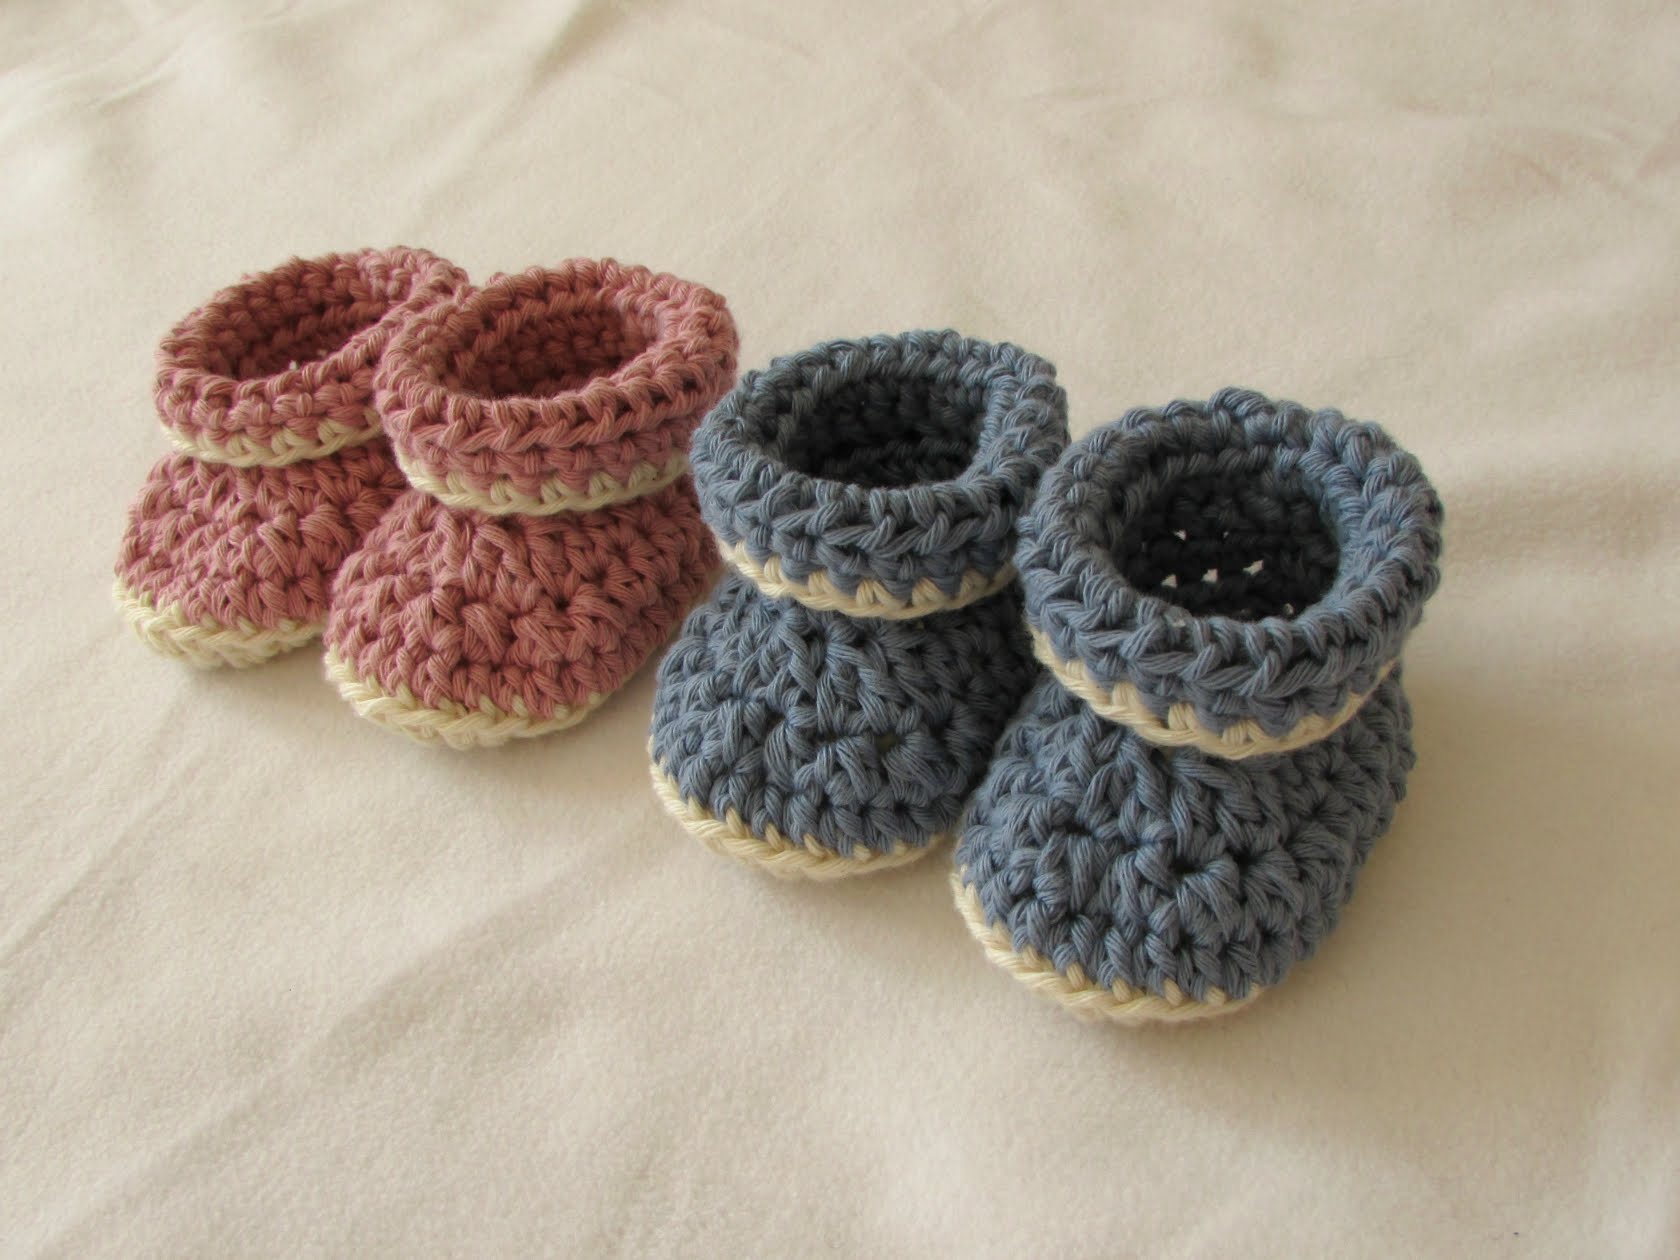 crochet baby booties very easy crochet cuffed baby booties tutorial - roll top baby shoes for wtccyhg